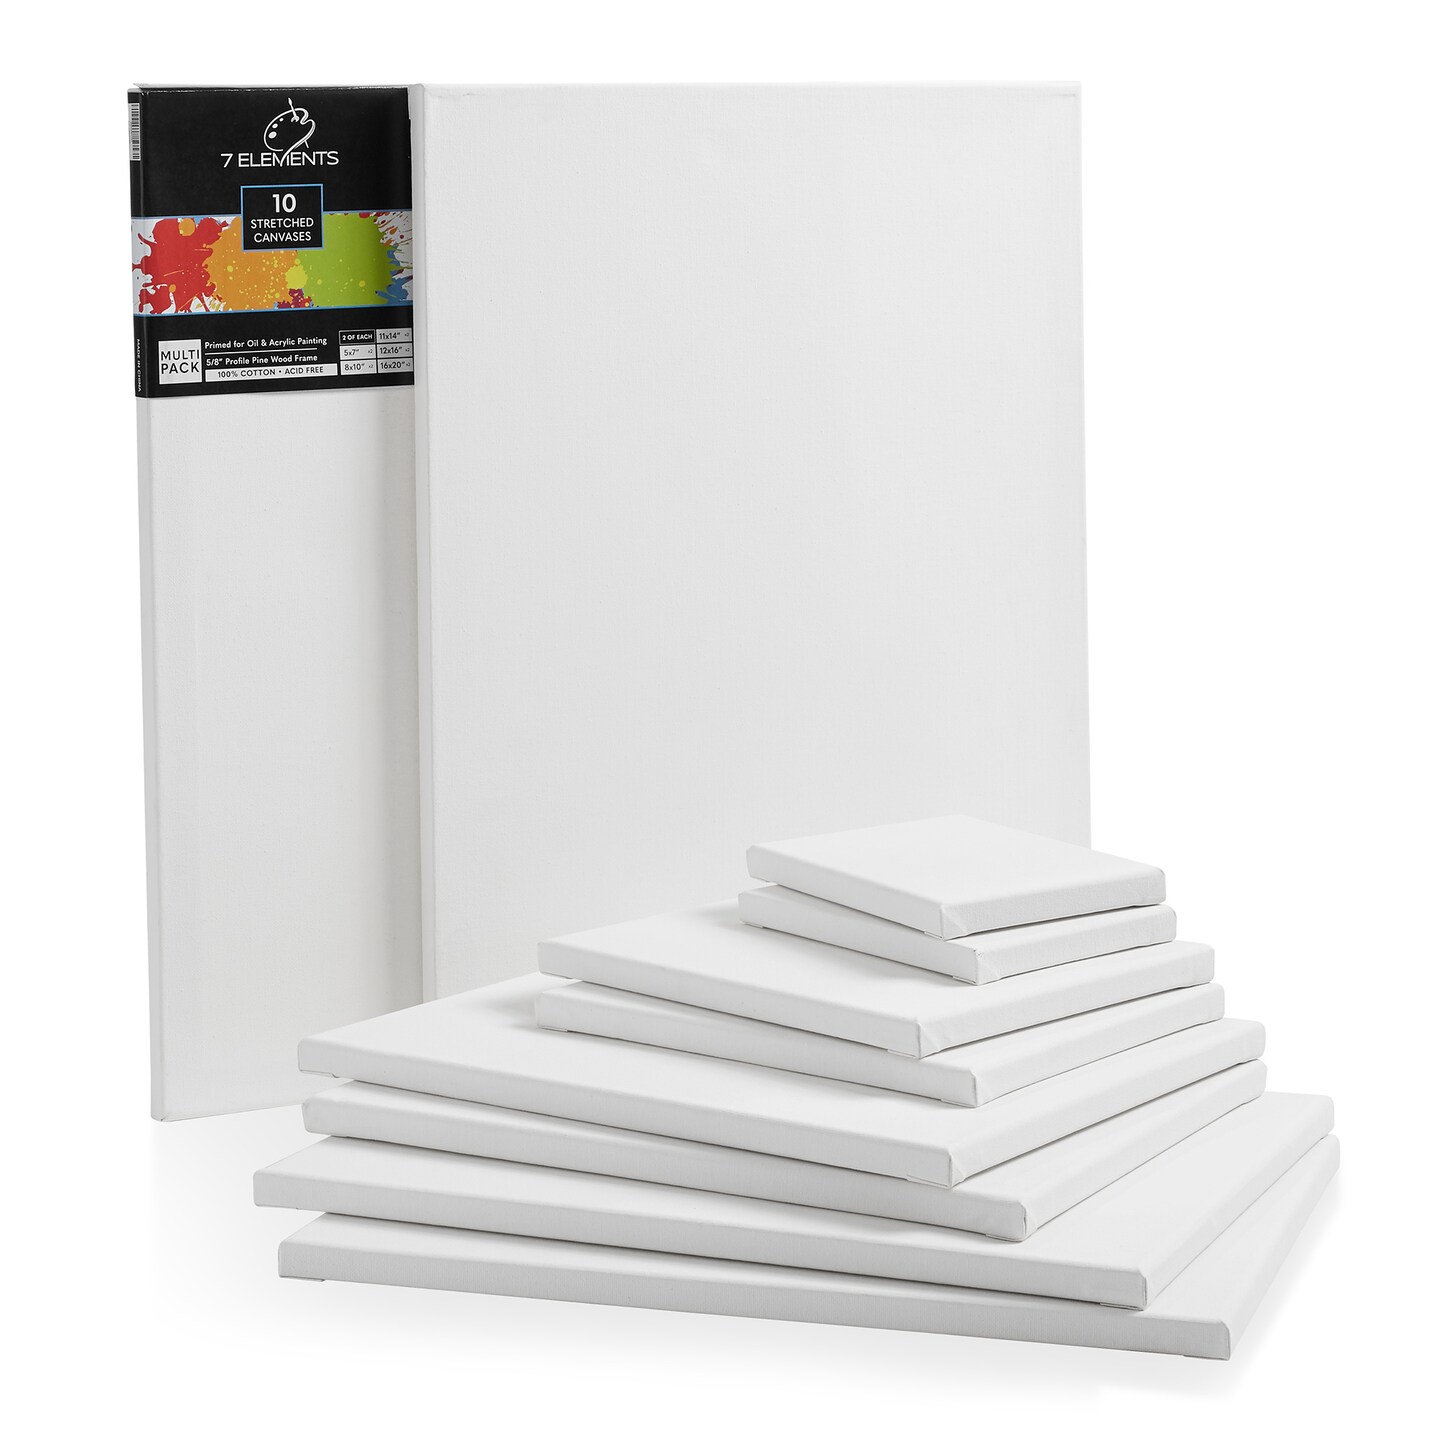 7 Elements (10 pack) Multi-sized Stretched Canvas for Painting - 100%  Cotton Pre Primed White Art Canvases